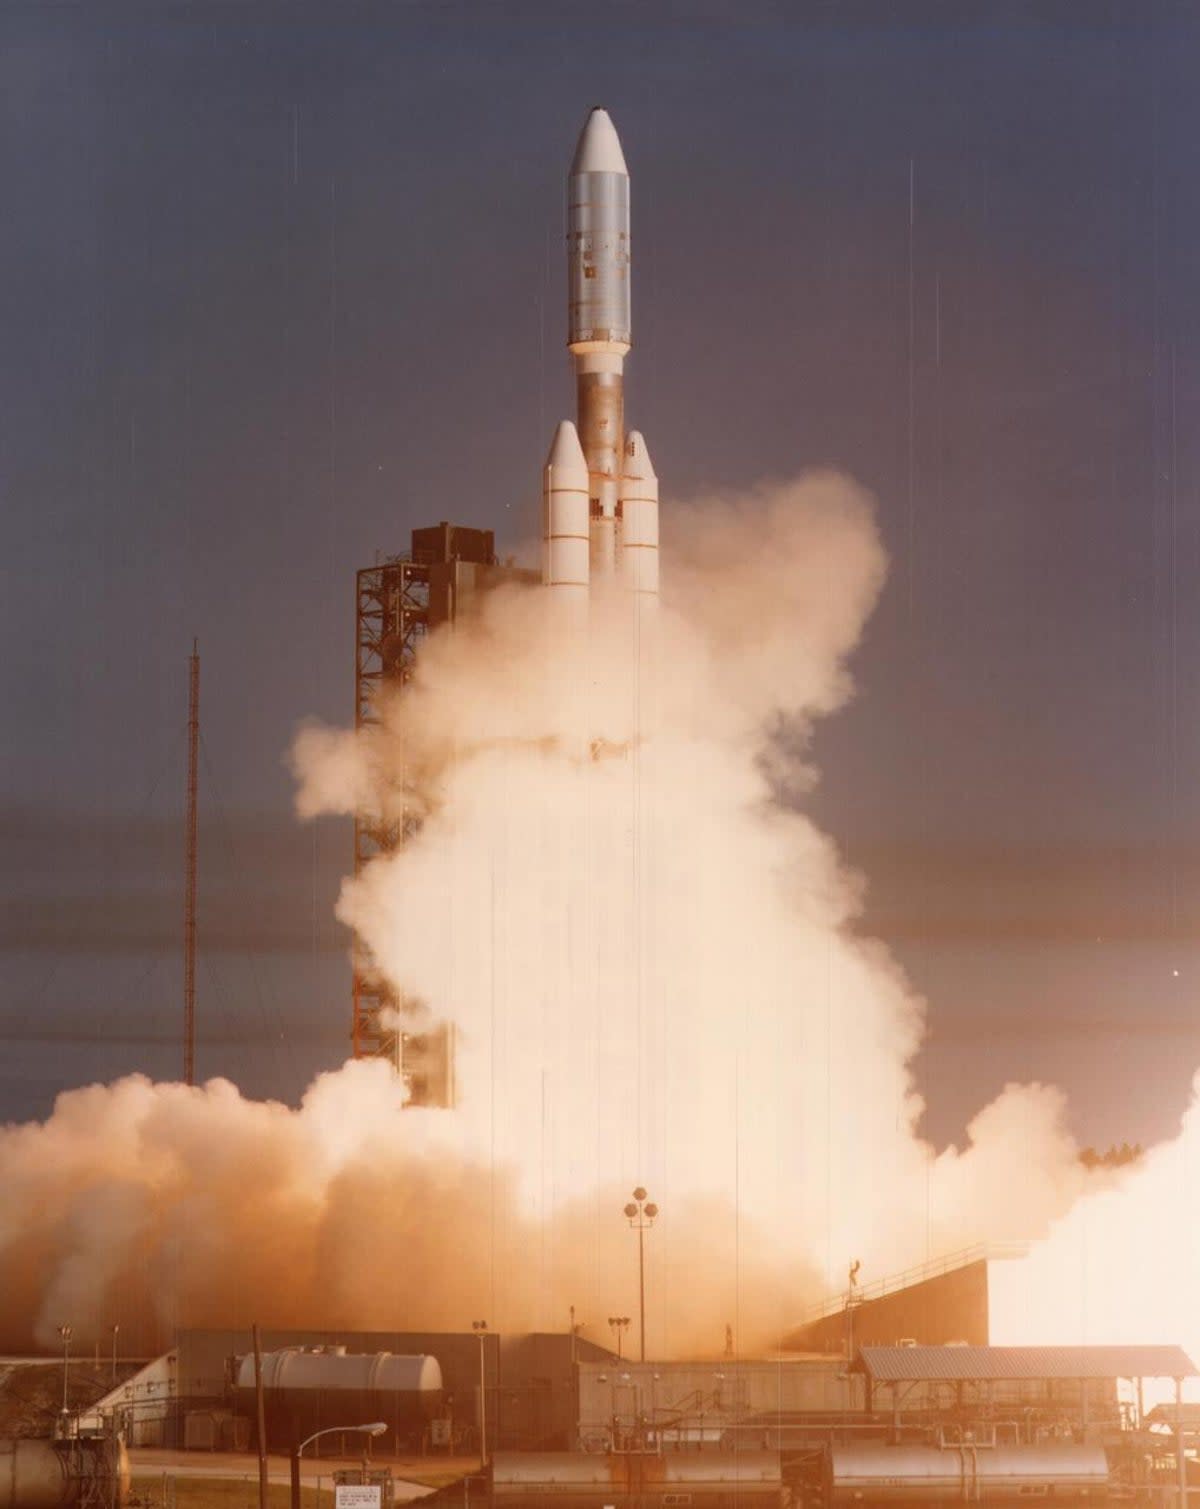 Voyager 1 begins its voyage into the cosmos from Kennedy Space Center, Florida, on 5 September 1977 (Nasa)